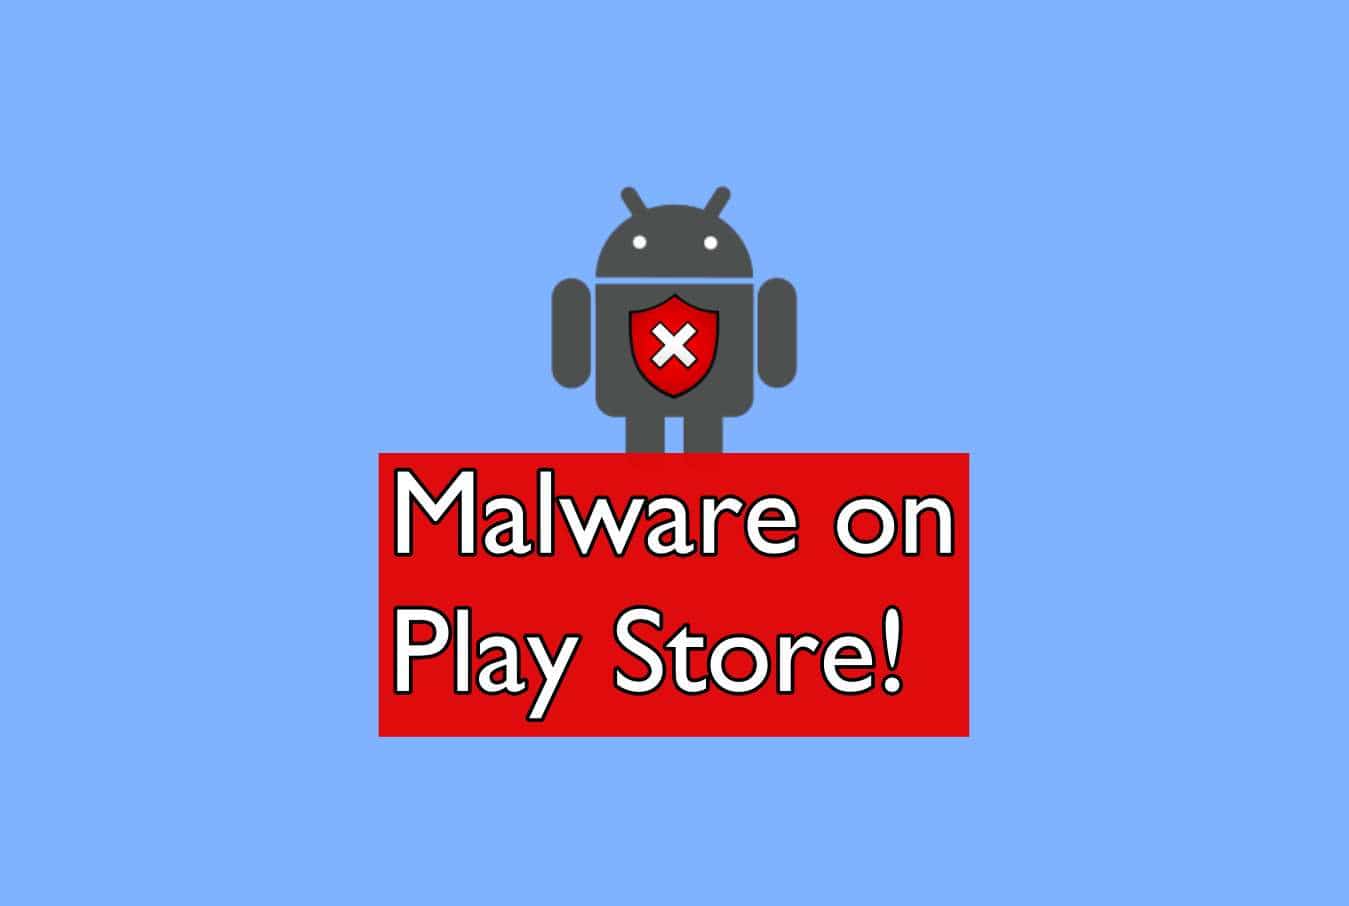 Play Store apps plagued with malware have 750,000 downloads